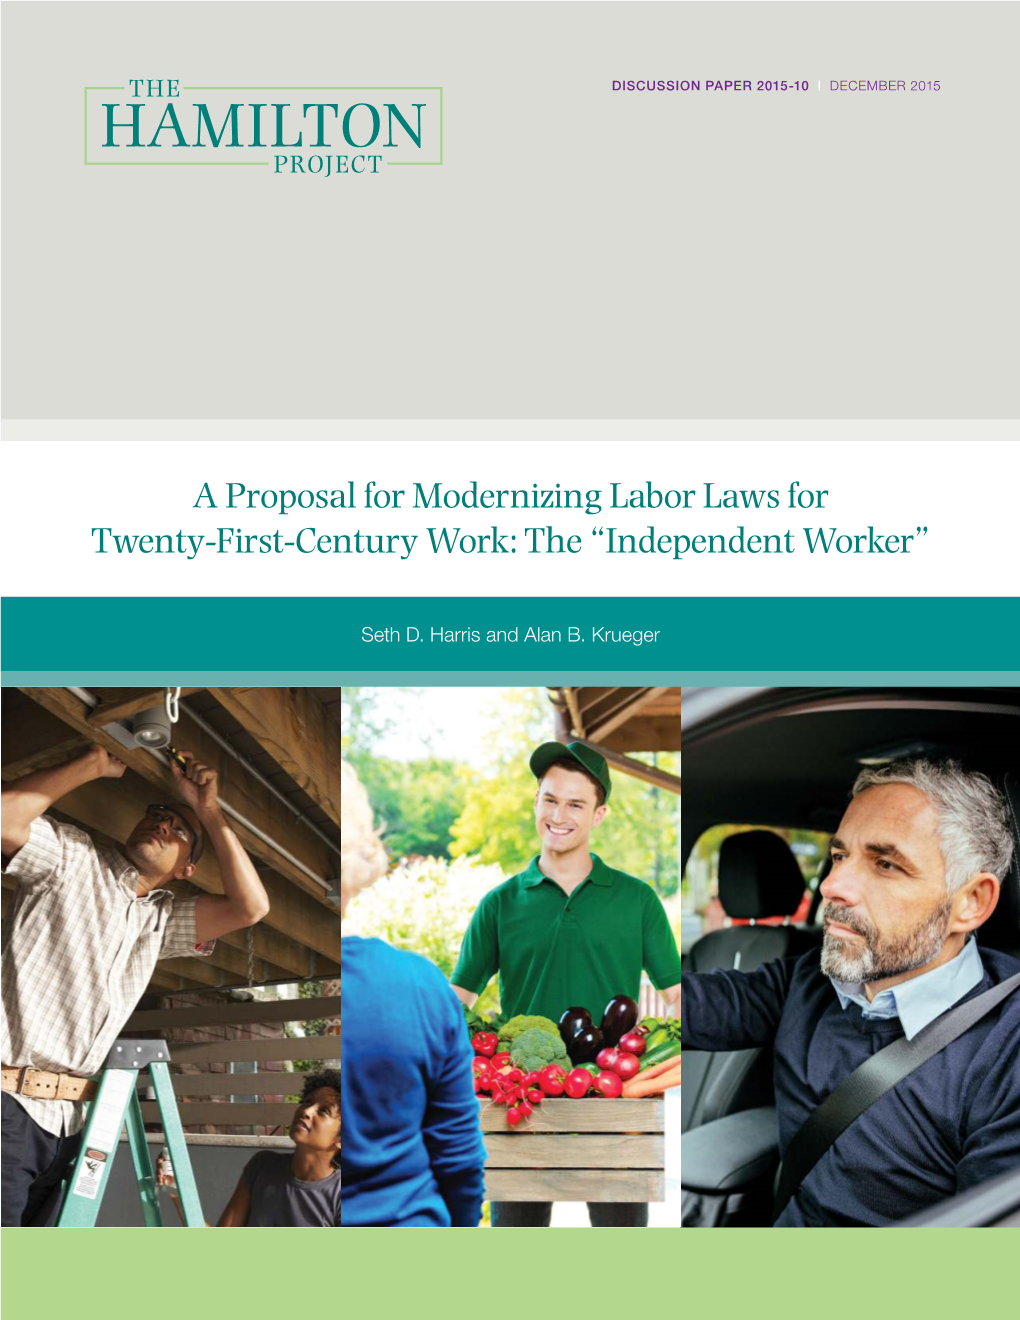 A Proposal for Modernizing Labor Laws for Twenty-First-Century Work: the “Independent Worker”